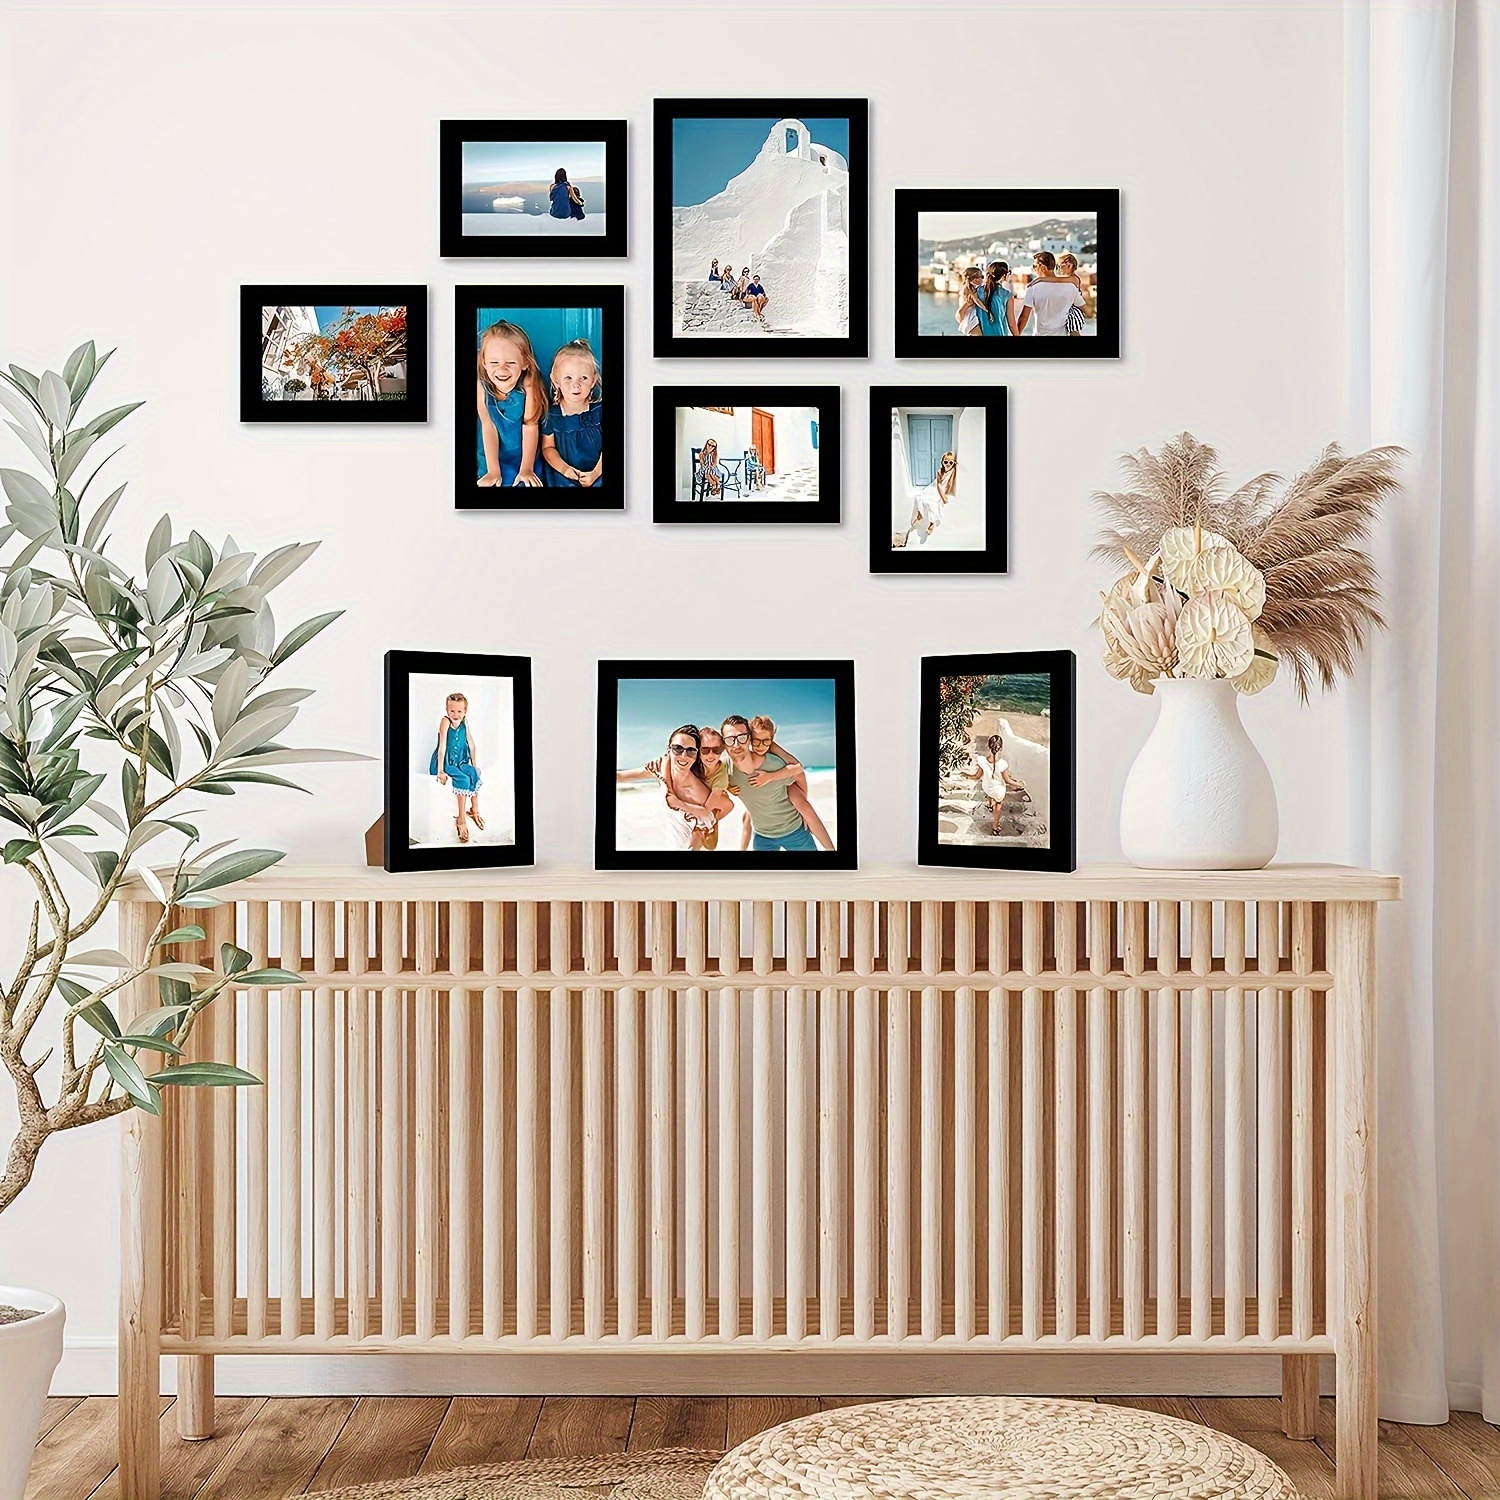 10pcs American Flat Black Picture Frame Collage Wall Trim - Gallery Wall  Frame Set With Two 8x10, Four 5x7, And Four 4x6 Frames, Hanging Hardware And